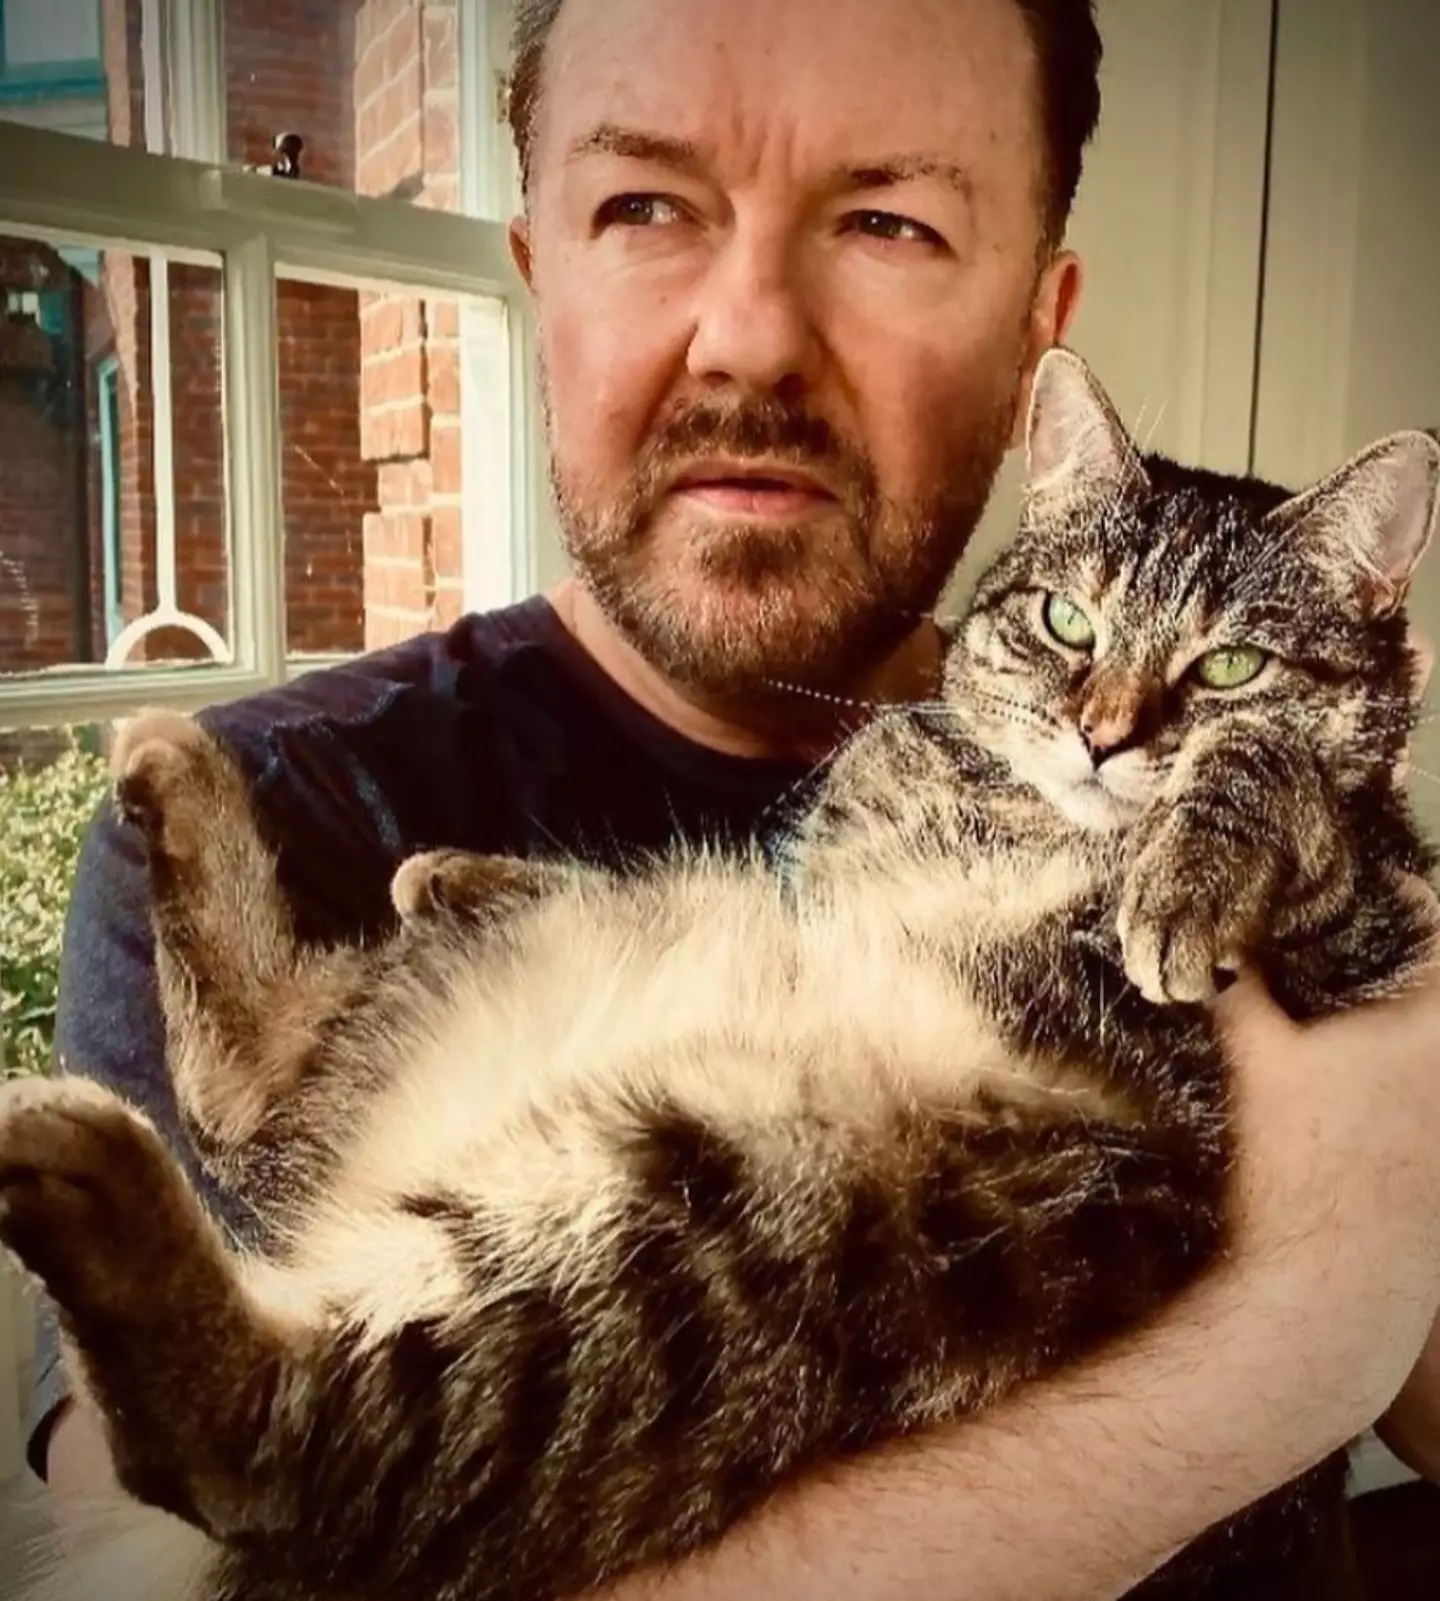 The comedian said he worries enough over his cat, never mind children.